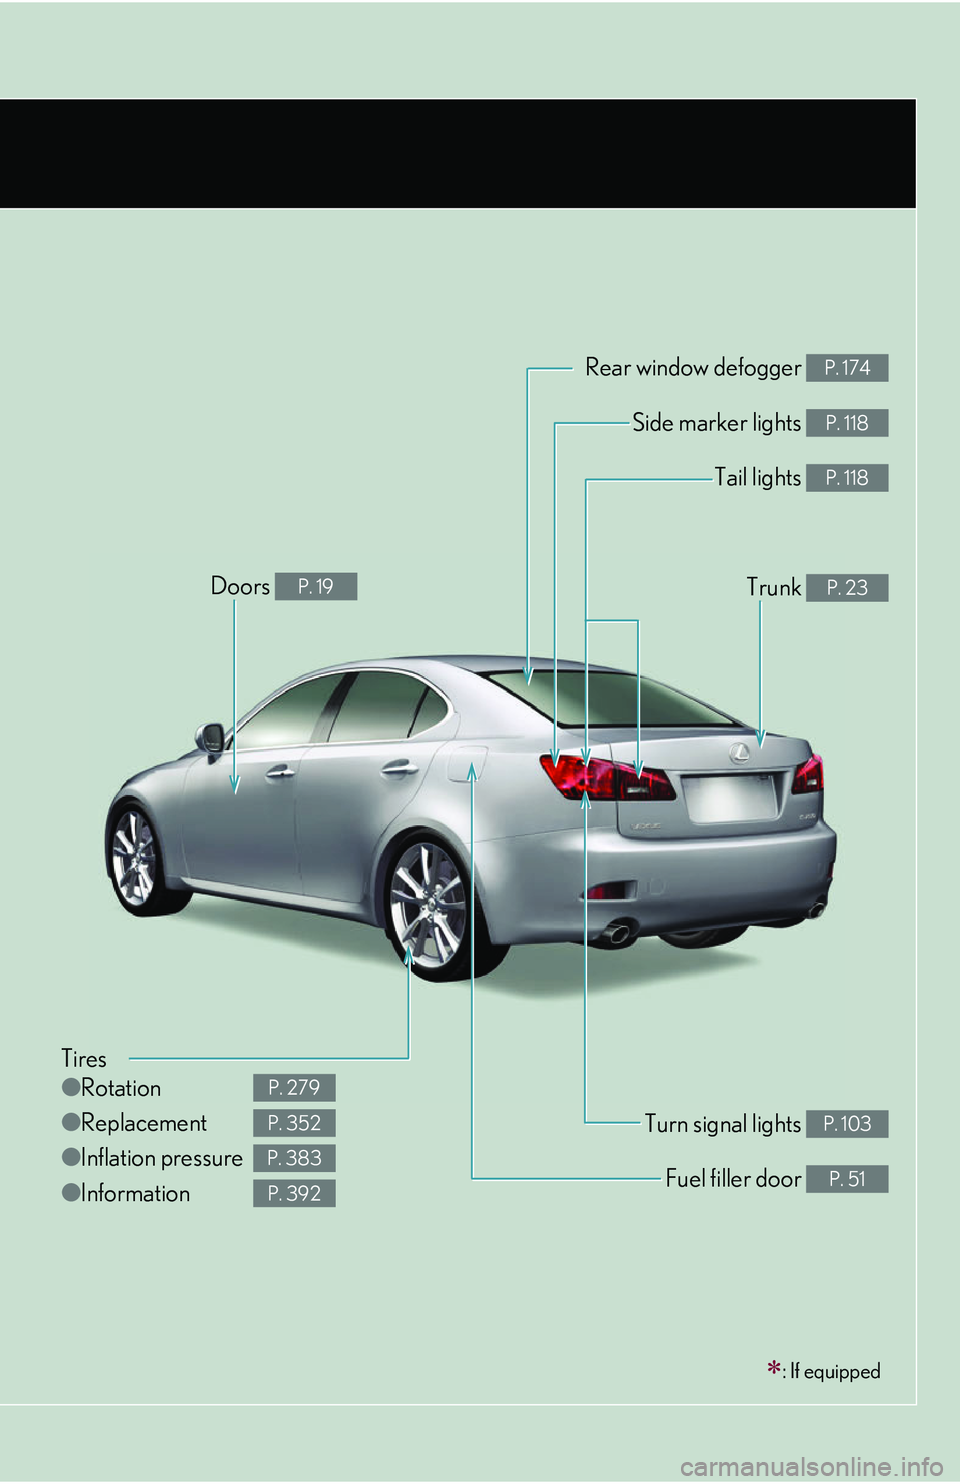 Lexus IS250 2006  Lexus Parking Assist-sensor / LEXUS 2006 IS350/250 FROM MAY 2006 PROD. OWNERS MANUAL (OM53619U) Tires
●Rotation
● Replacement
● Inflation pressure
● Information
P. 279
P. 352
P. 383
P. 392
: If equipped
Tail lights P. 118
Side marker lights P. 118
Trunk P. 23
Rear window defogger P. 1